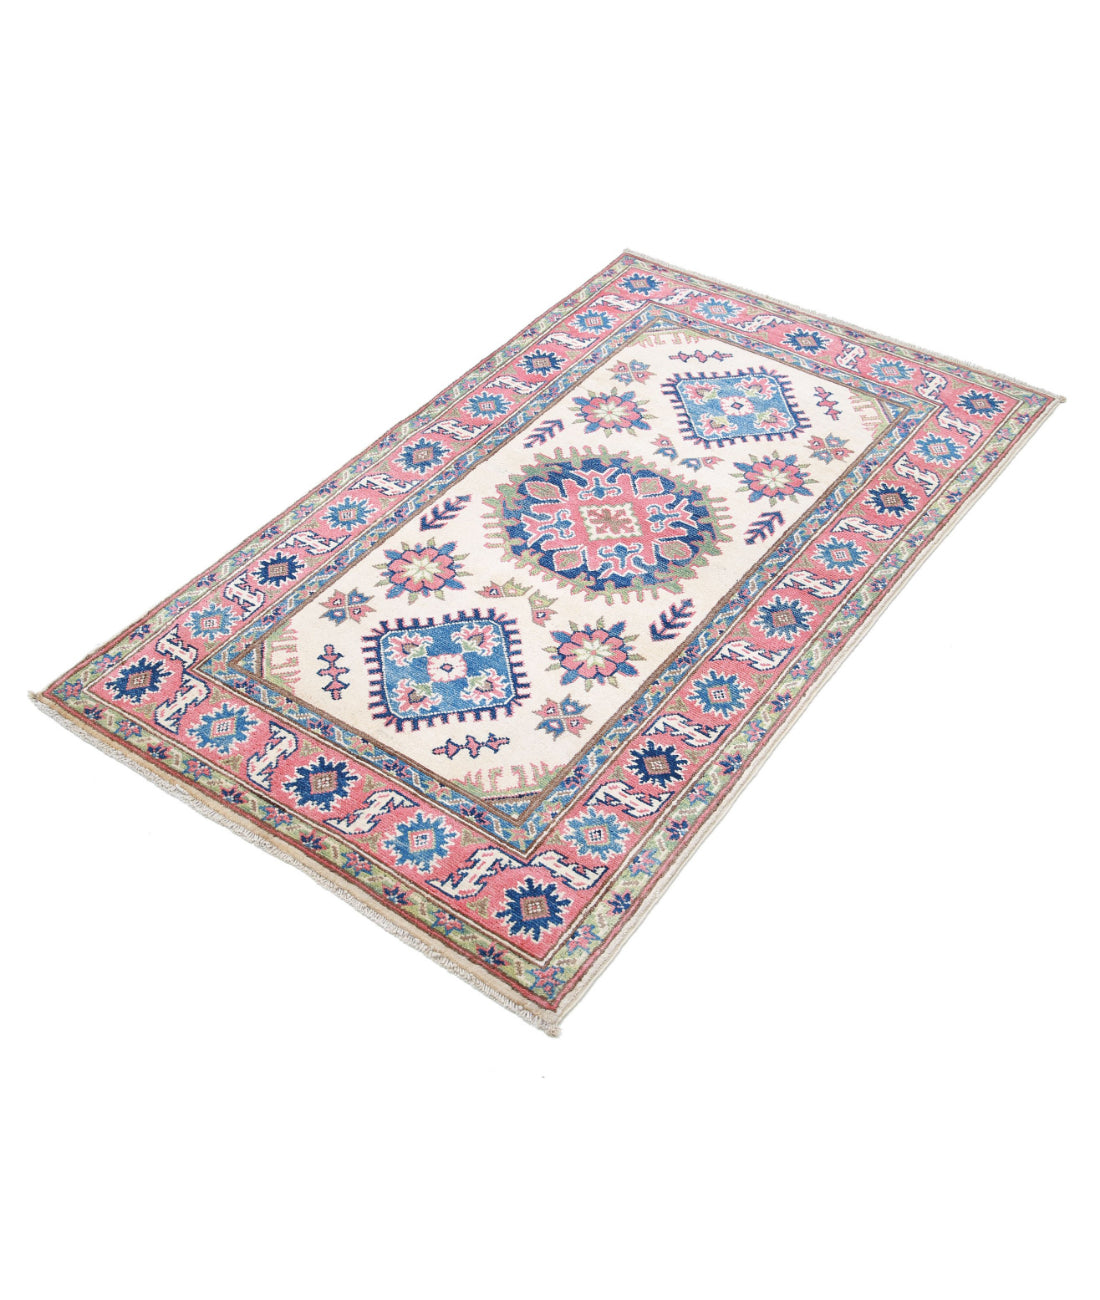 Hand Knotted Tribal Kazak Wool Rug - 2'10'' x 4'11'' 2'10'' x 4'11'' (85 X 148) / Ivory / Red